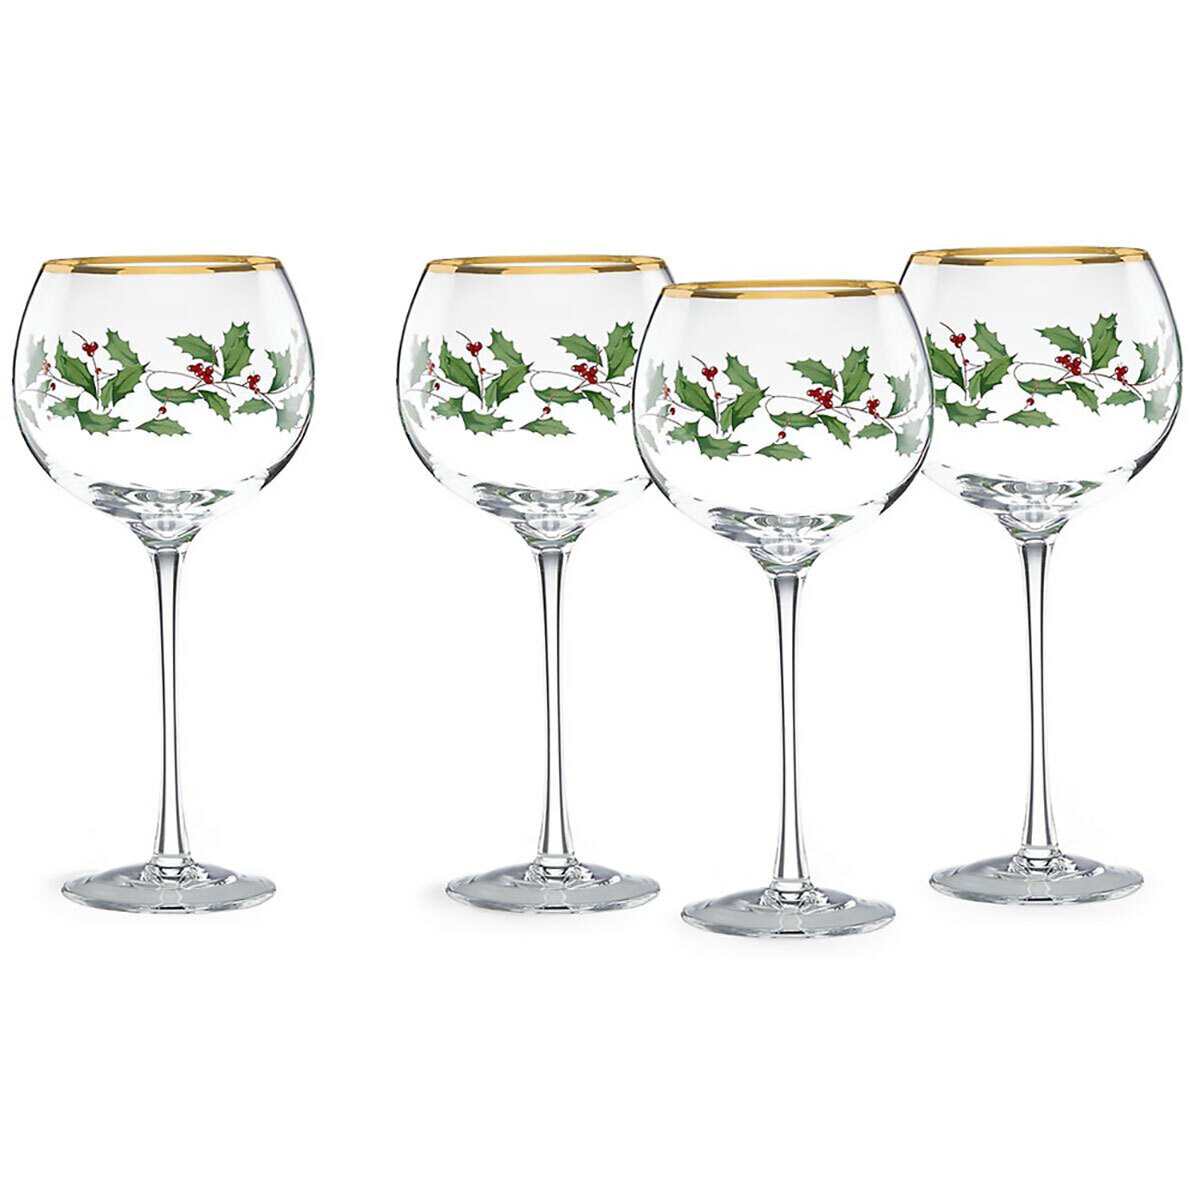 Lenox Holiday Decal Balloon Wines Set of 4 856101